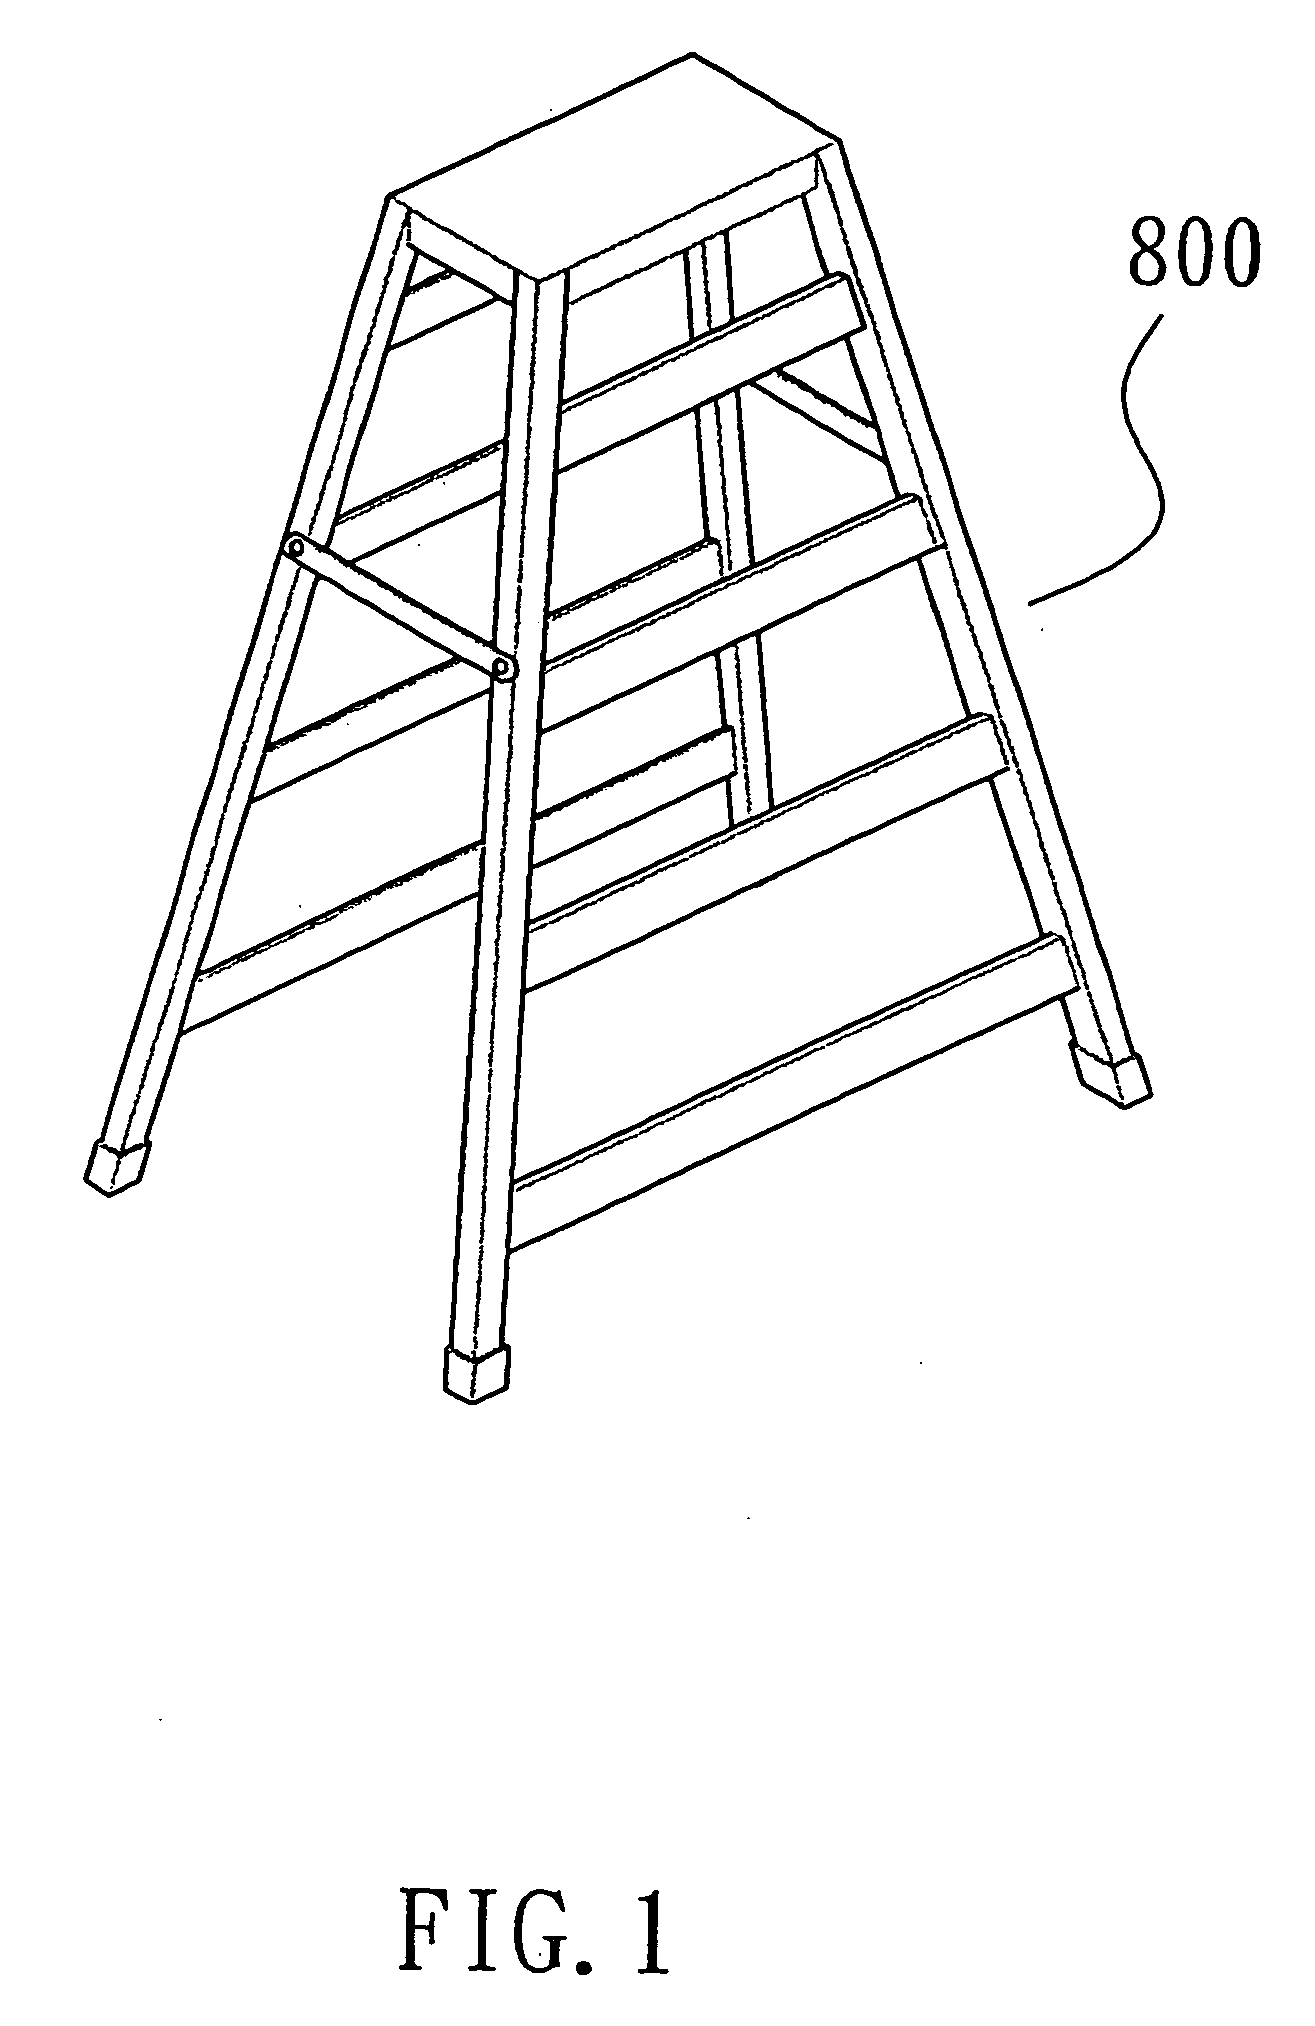 Extension ladder with improved structure